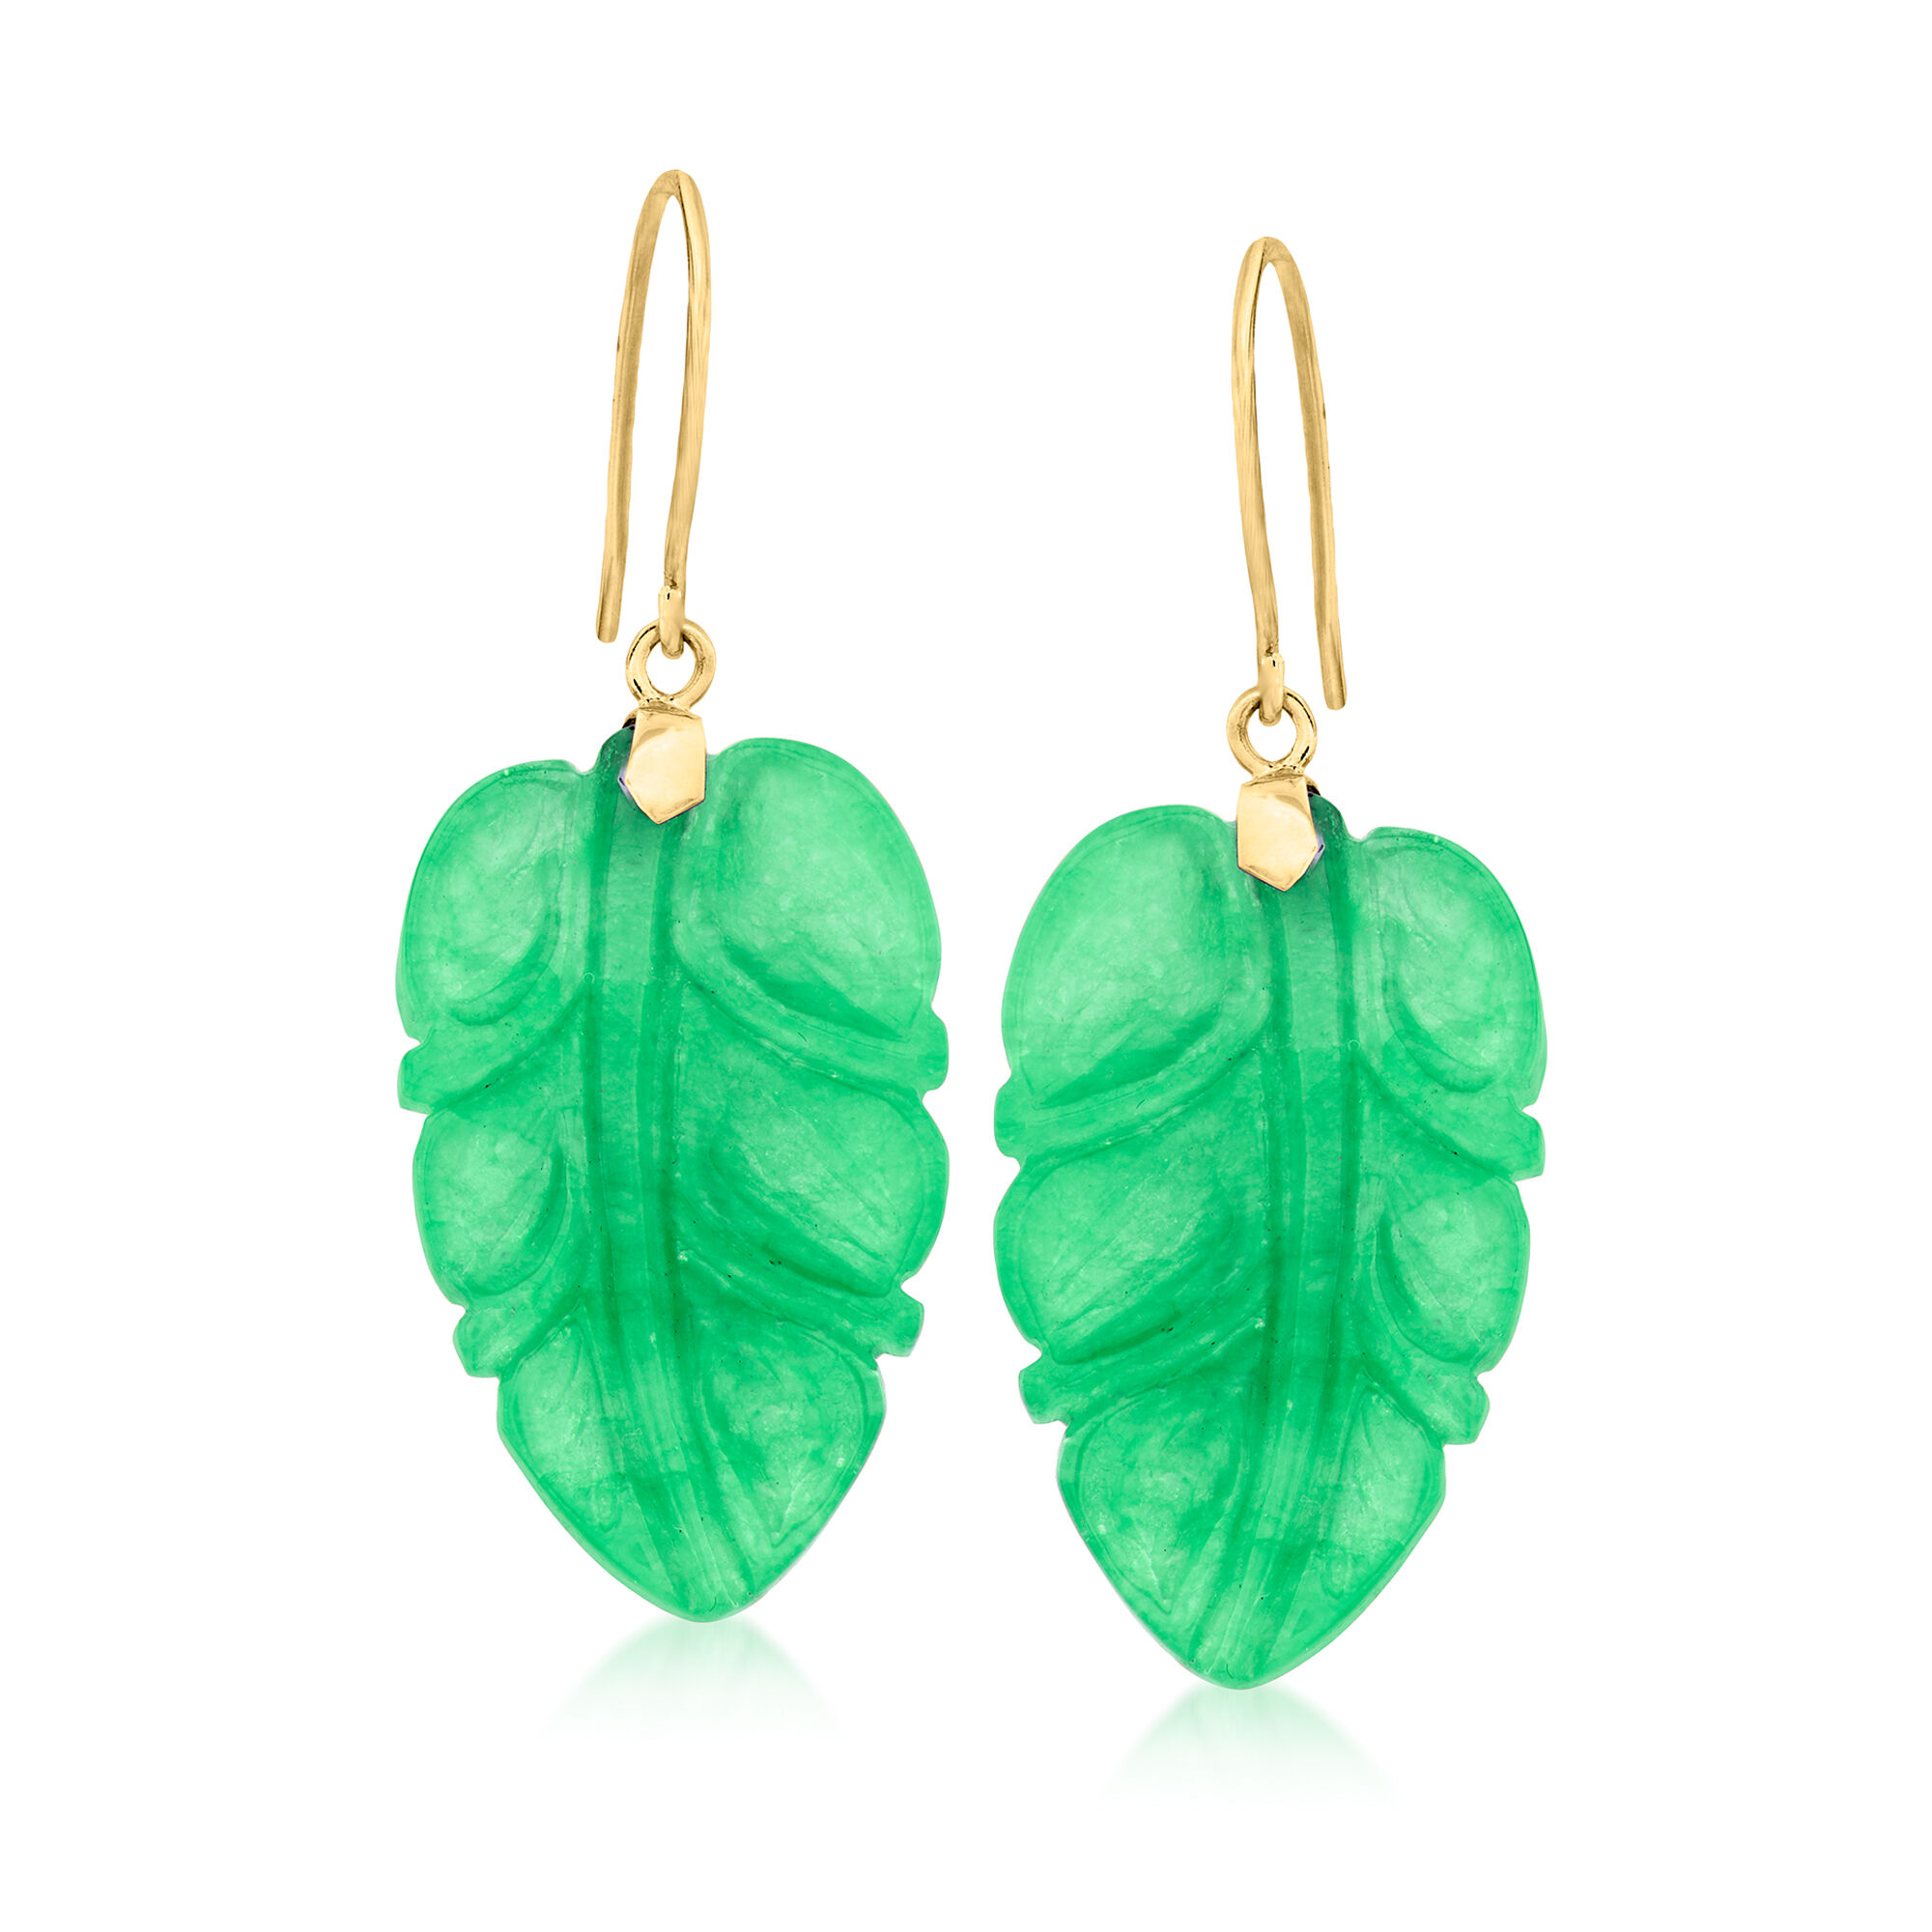 Jade Leaf Drop Earrings with 14kt Yellow Gold | Ross-Simons